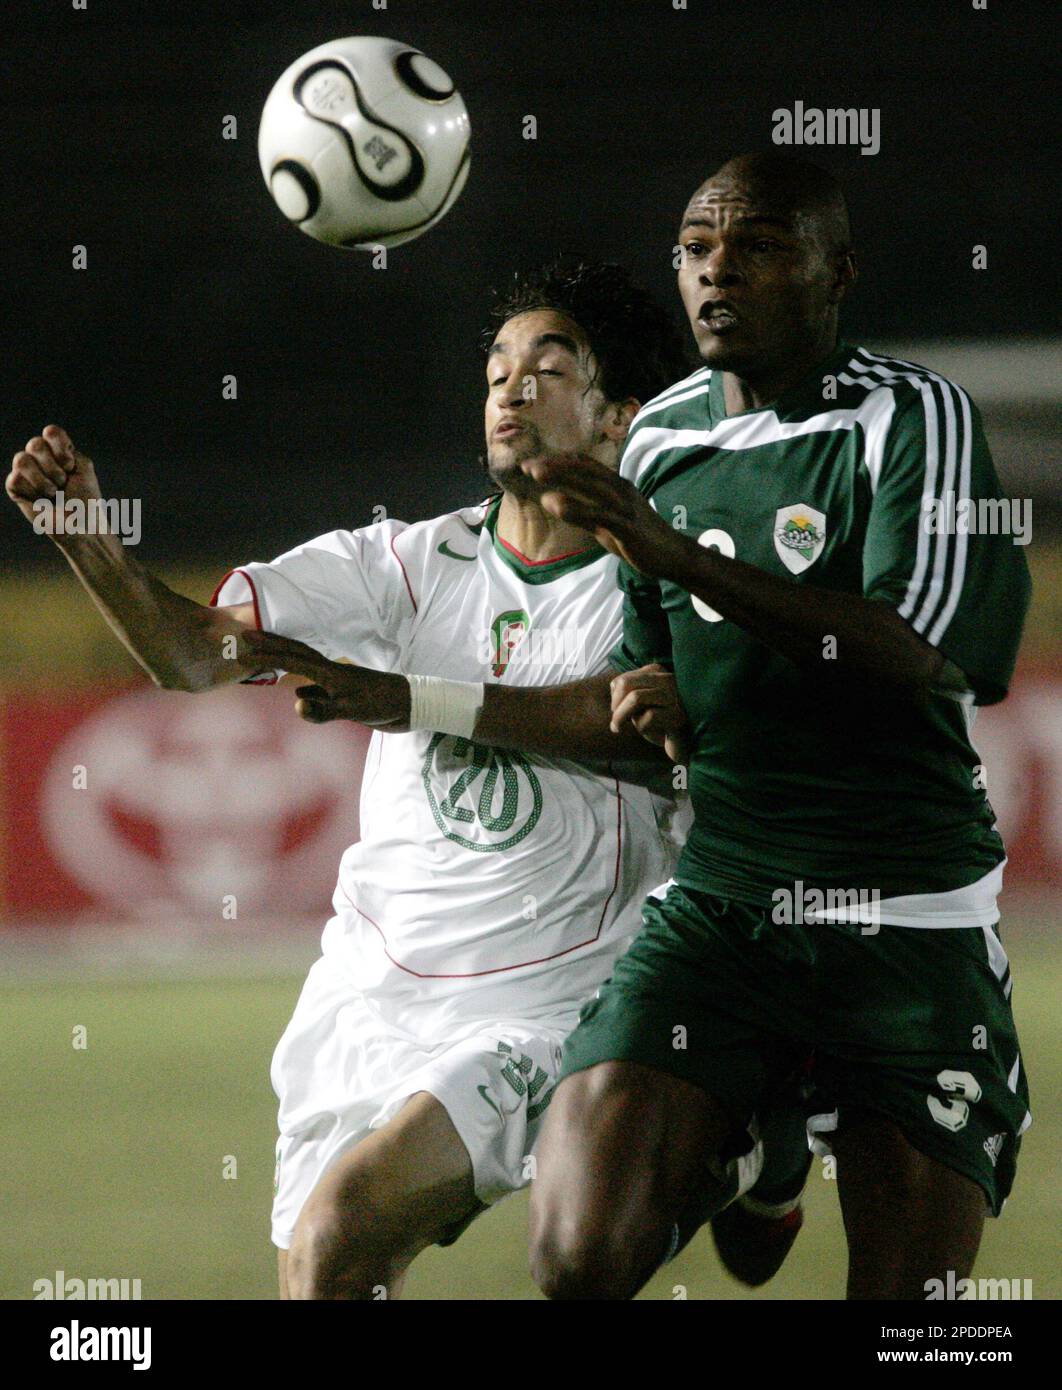 Youssef Hadji of Morocco, left, and Naji Shushan of Libya fight for the  ball during the African Nations Cup Group A soccer match between Morocco  and Libya at the Military Academy stadium